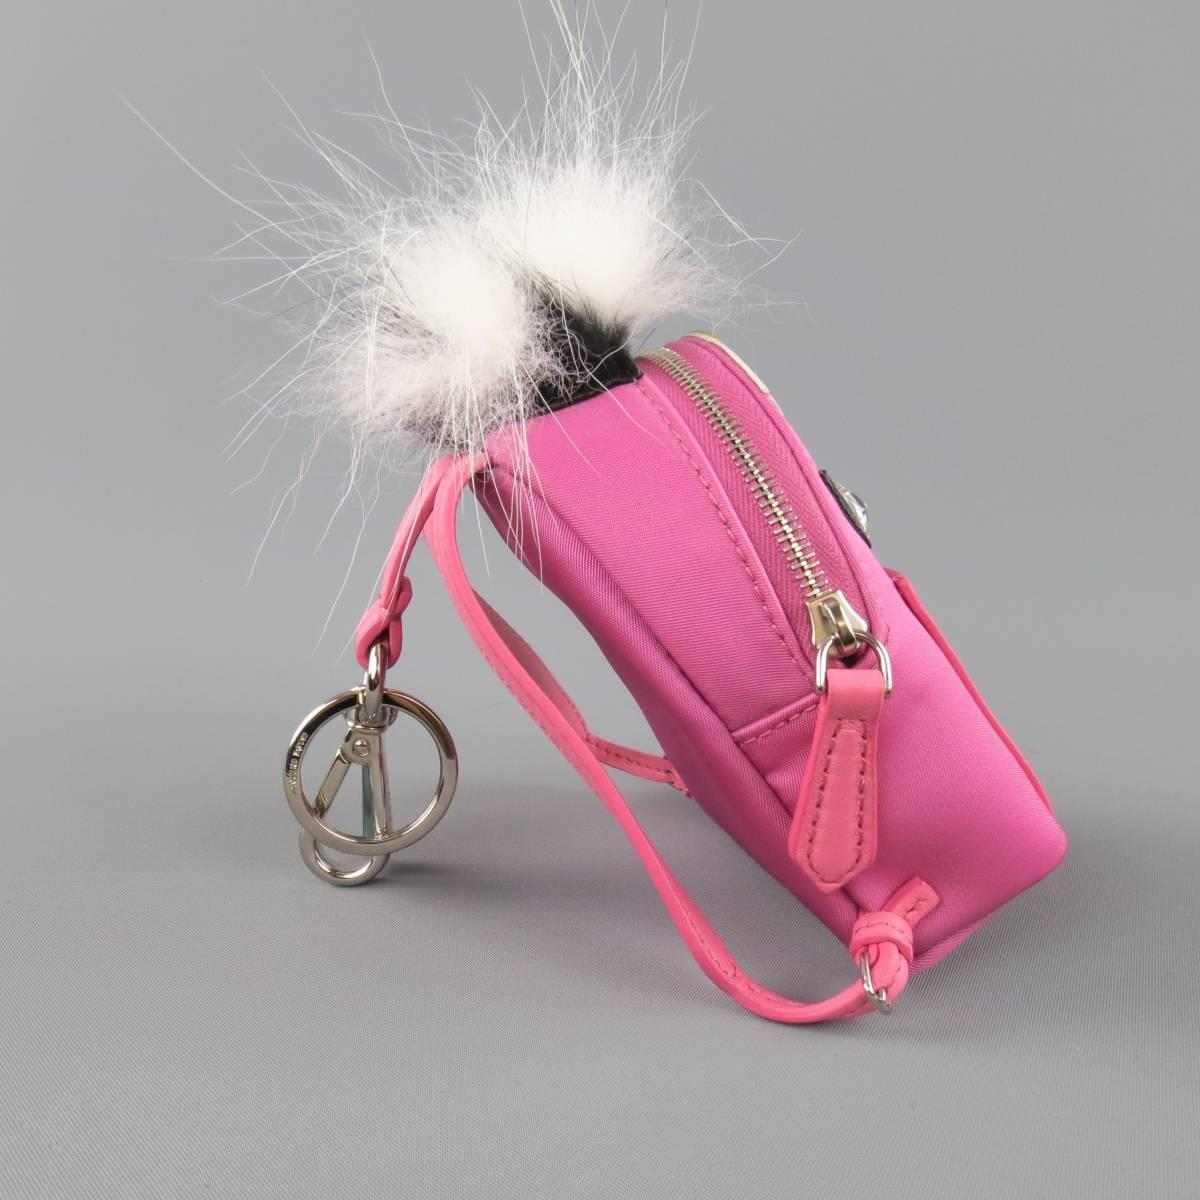 FENDI Micro Backpack Monster keychain comes in pink nylon with black, yellow, and white leather patch details, crystal eyes, and Fox & Nutria fur trim. Made in Italy.
 
New Without Tags. Retails at $1050.00.
 
Measurements:
 
Length: 3.5 in.
Width: